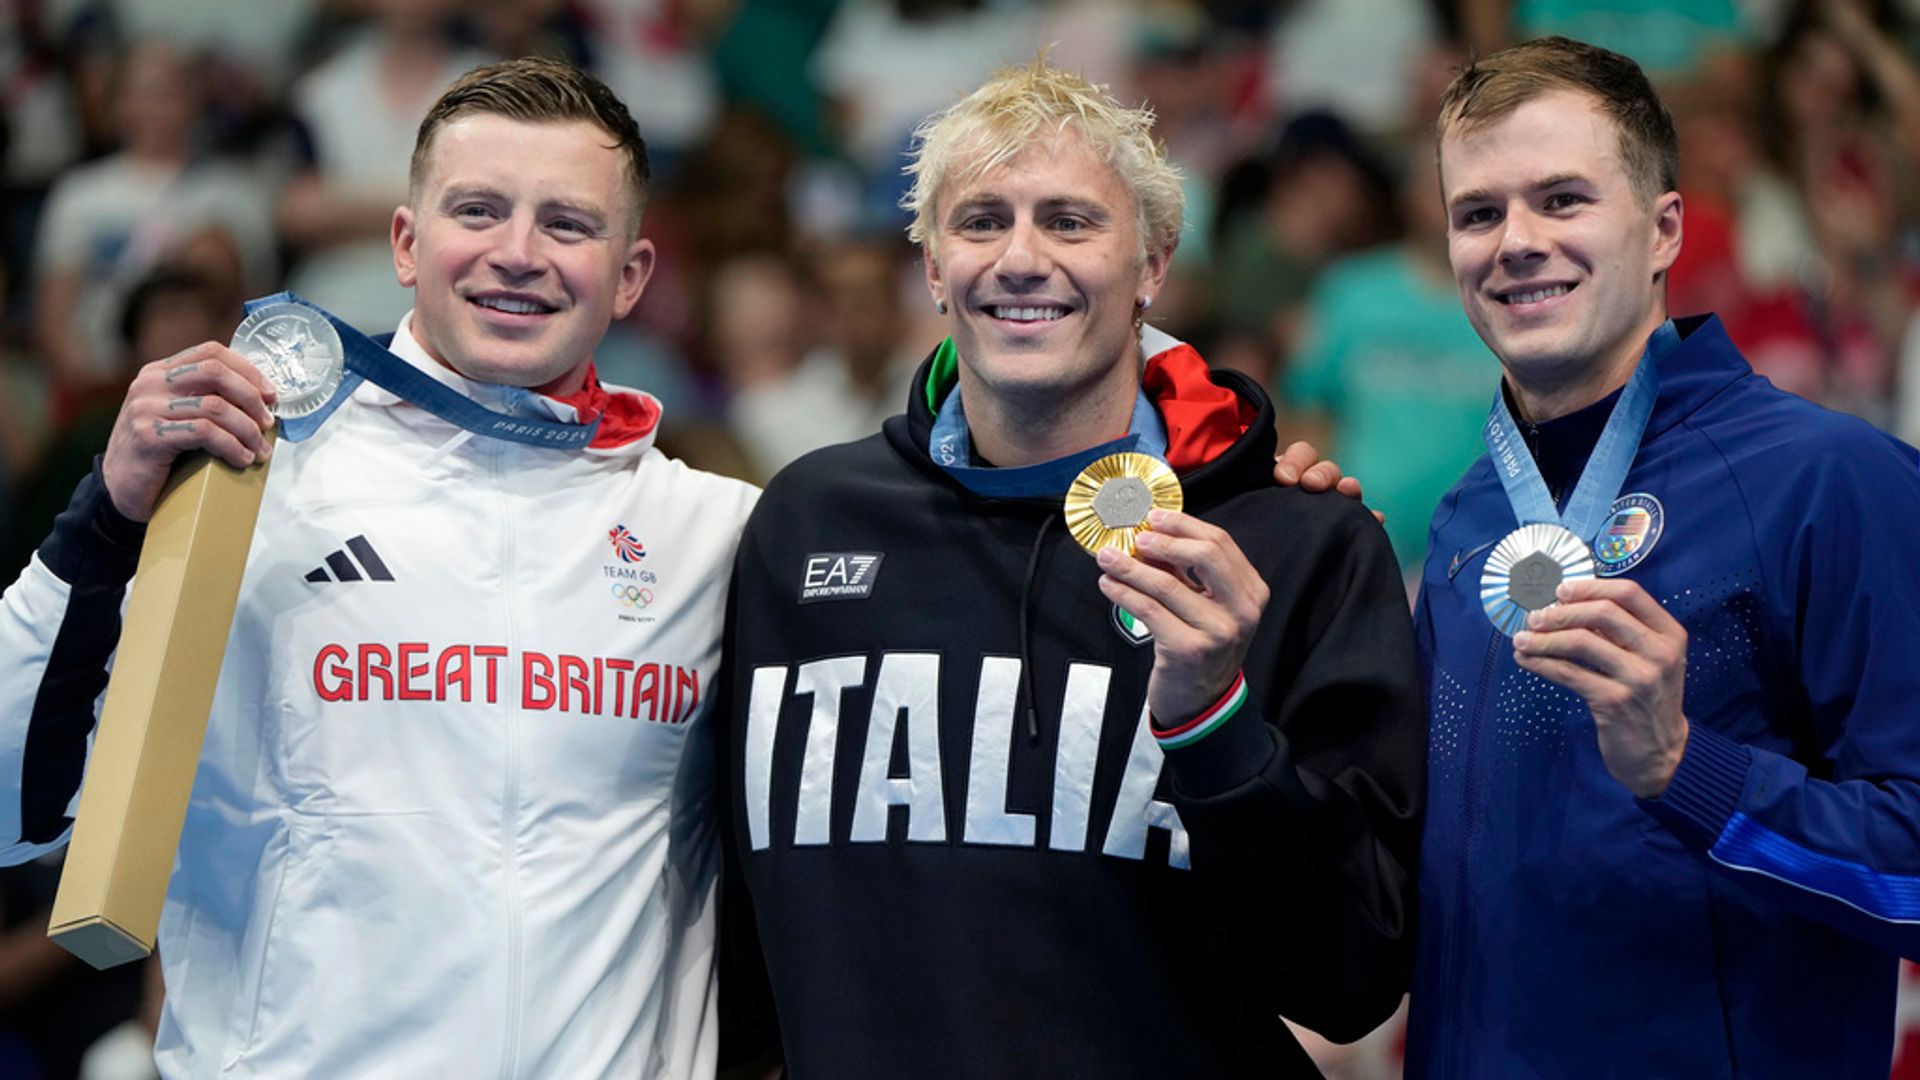 Adam Peaty pipped to gold as he misses out on third consecutive title